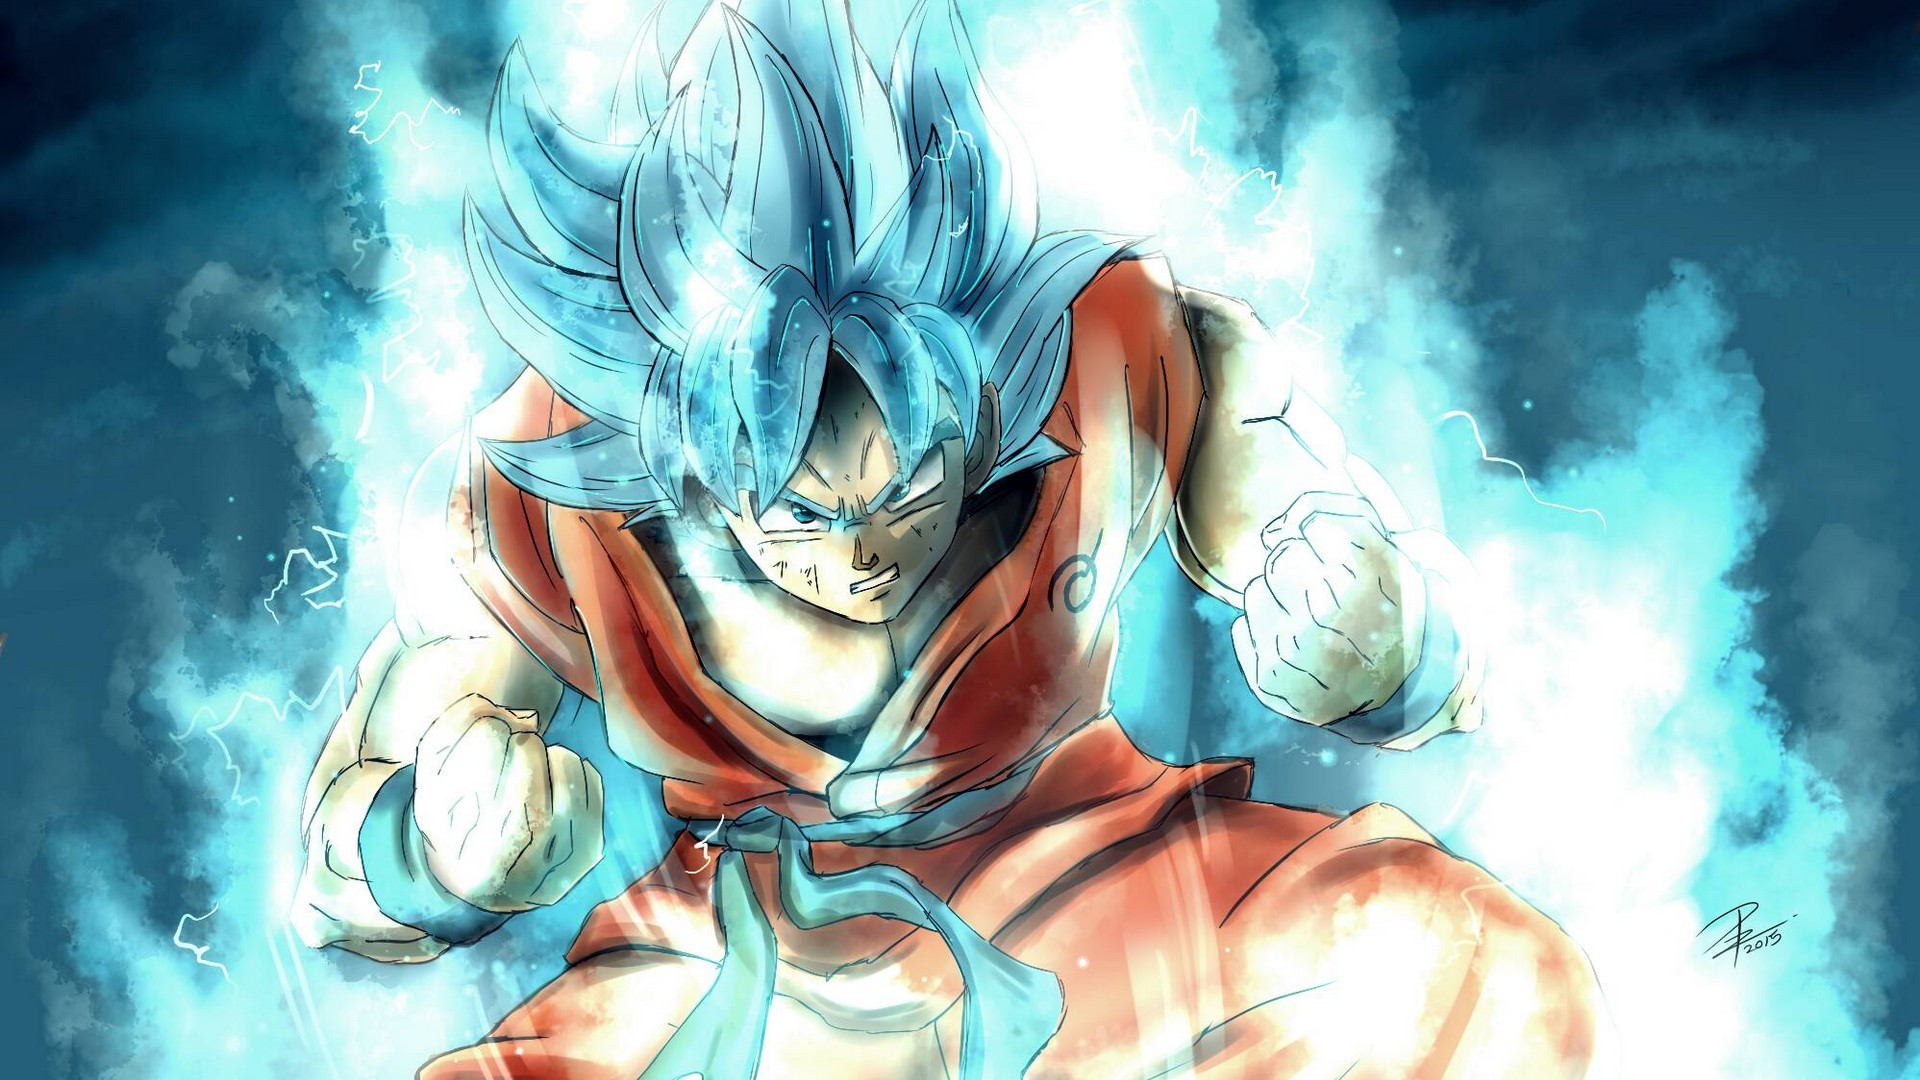 Best Goku SSJ Blue Wallpaper HD with image resolution 1920x1080 pixel. You can make this wallpaper for your Desktop Computer Backgrounds, Mac Wallpapers, Android Lock screen or iPhone Screensavers